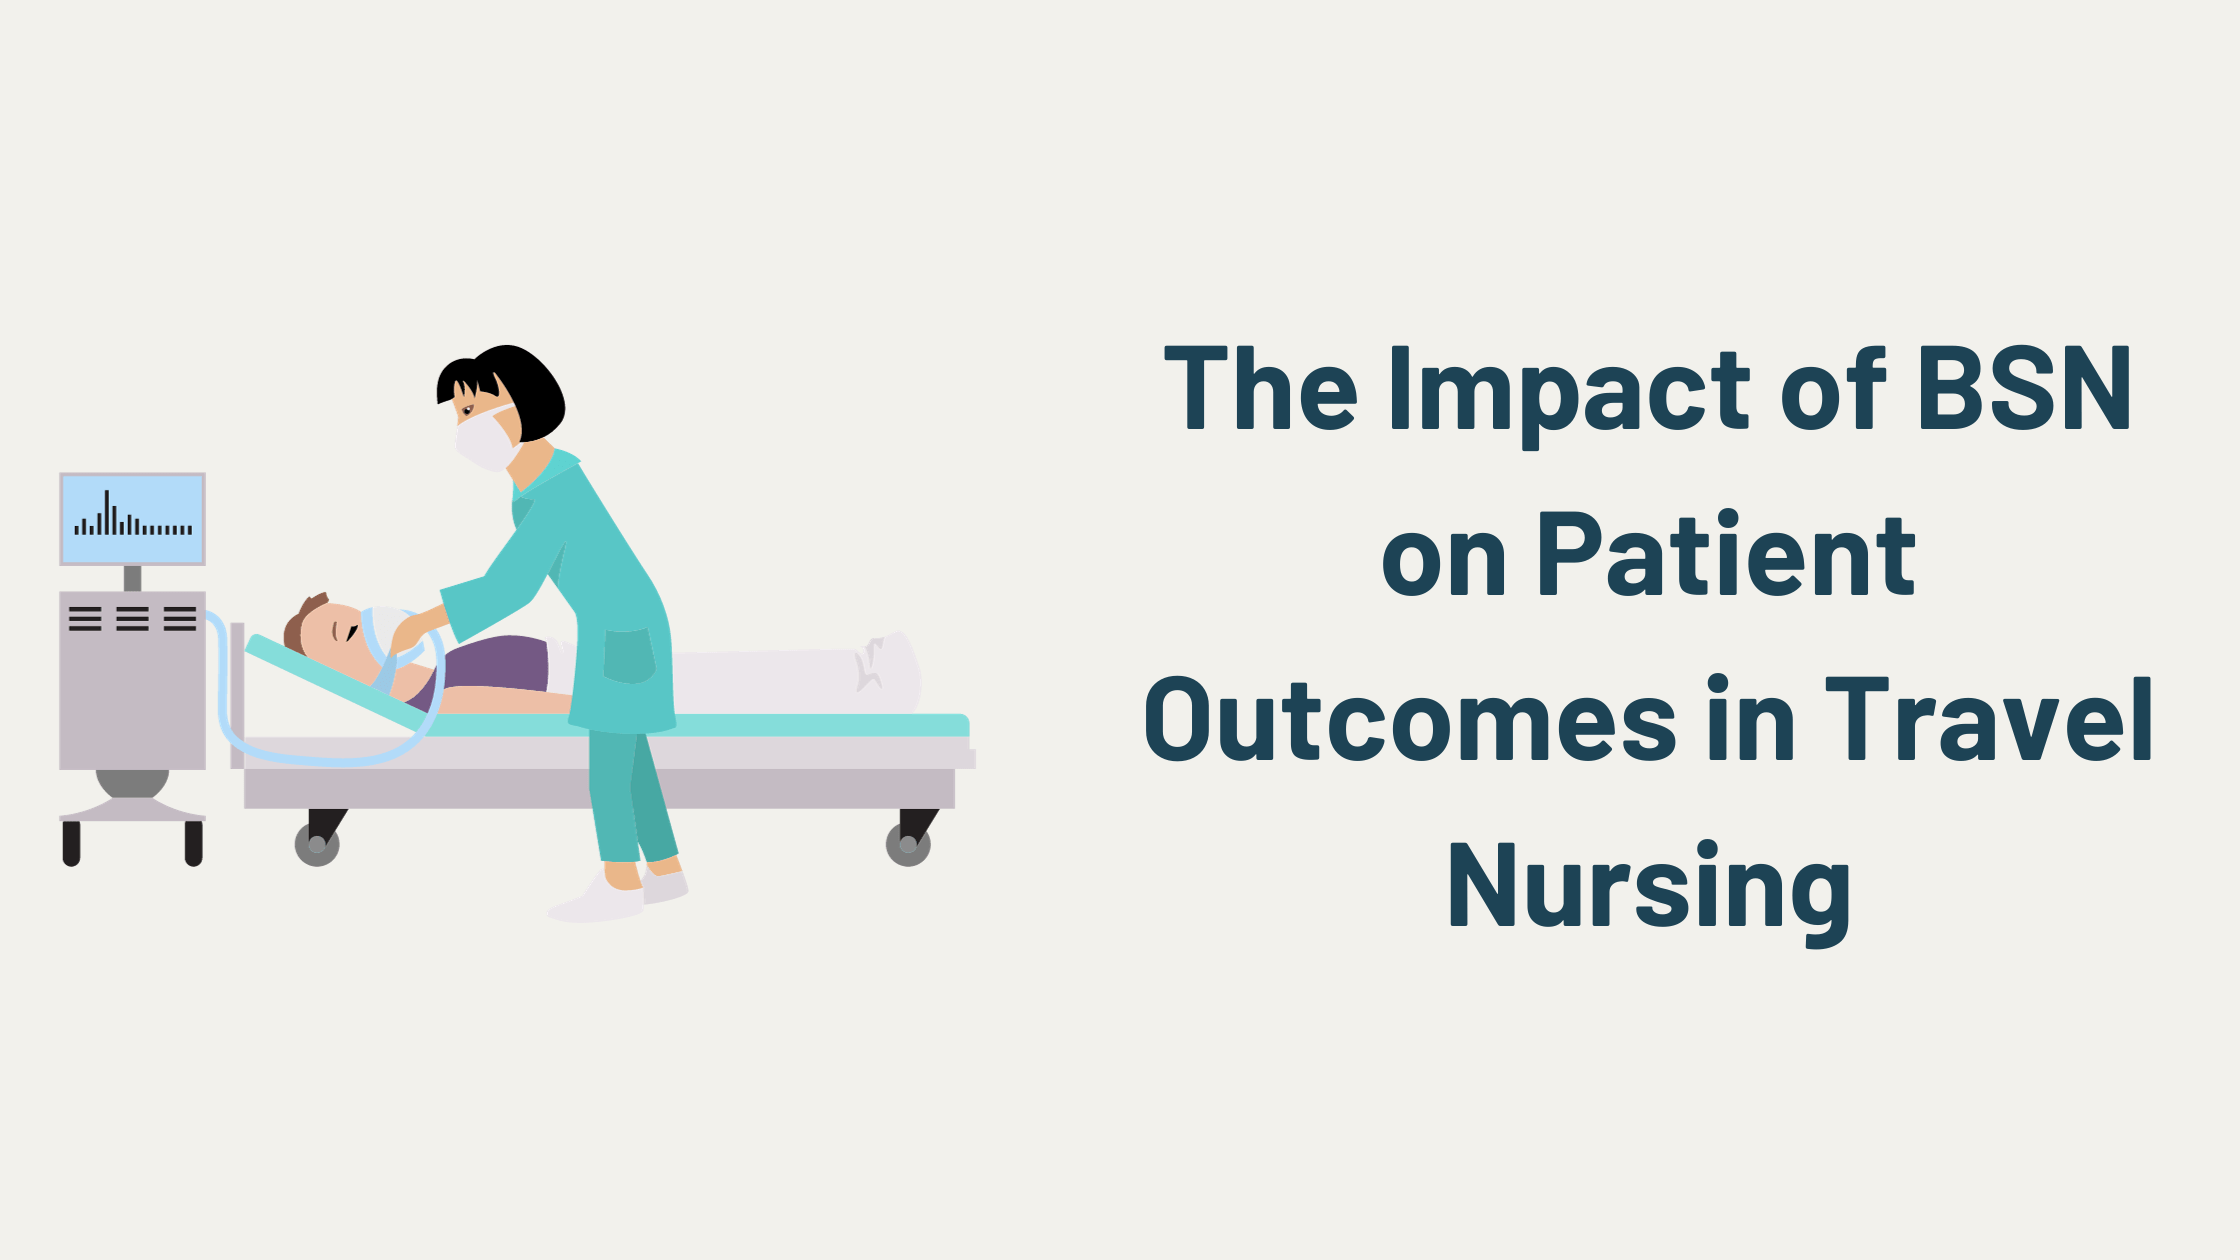 The Impact of BSN on Patient Outcomes in Travel Nursing